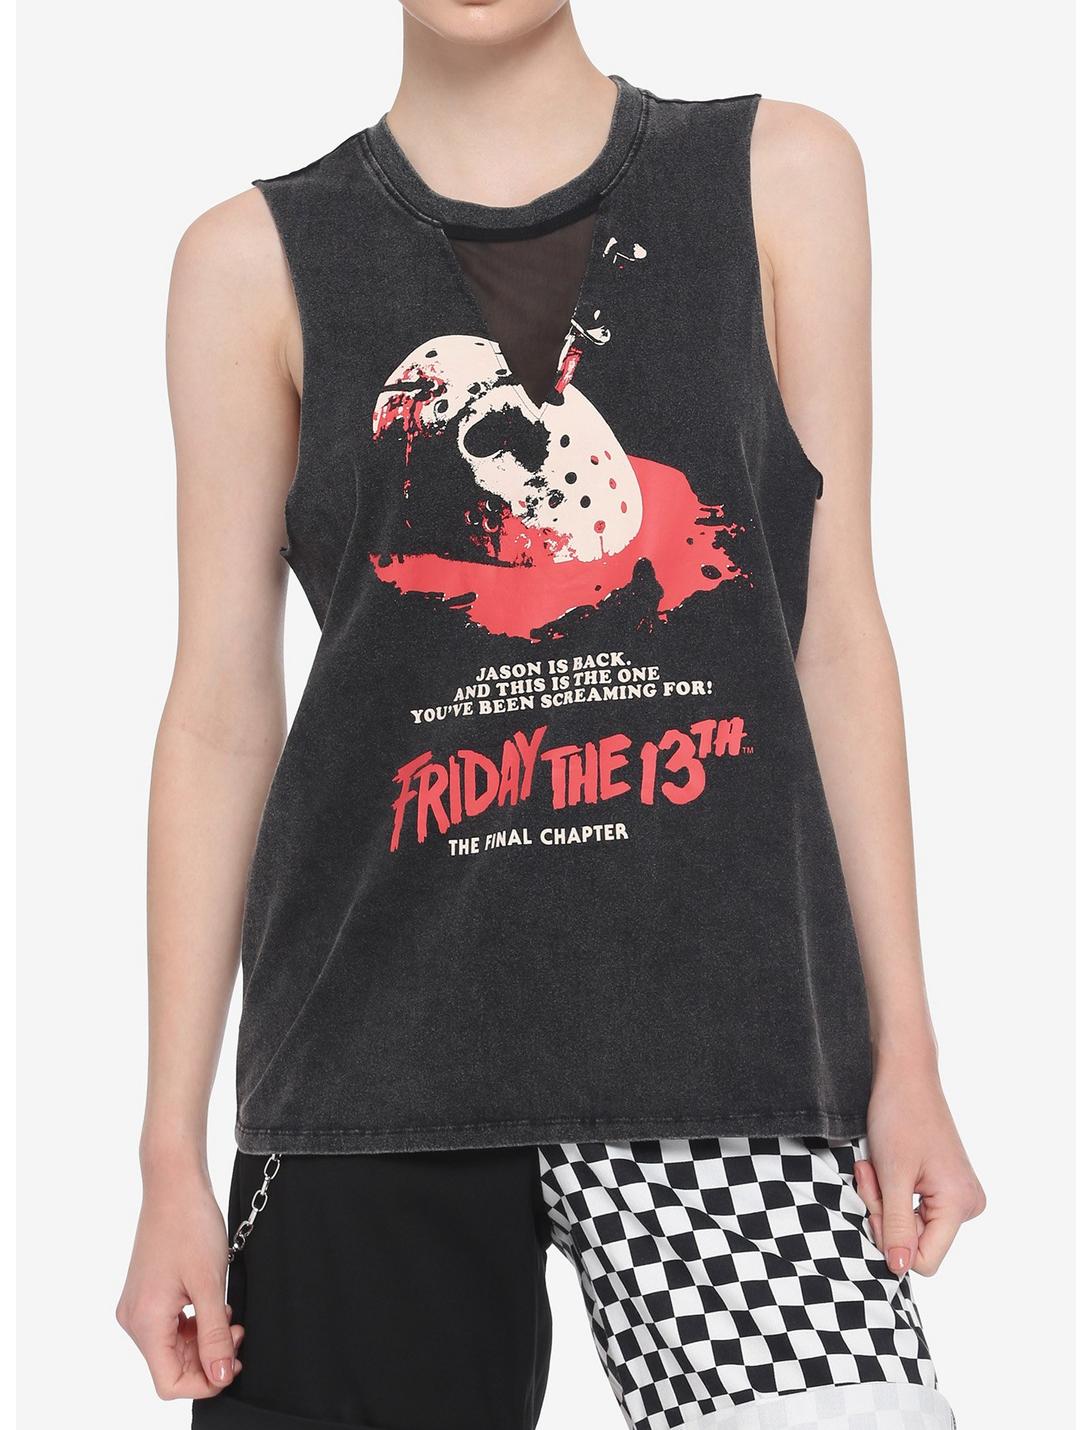 Friday The 13th: The Final Chapter Poster Mesh Insert Girls Muscle Top, MULTI, hi-res